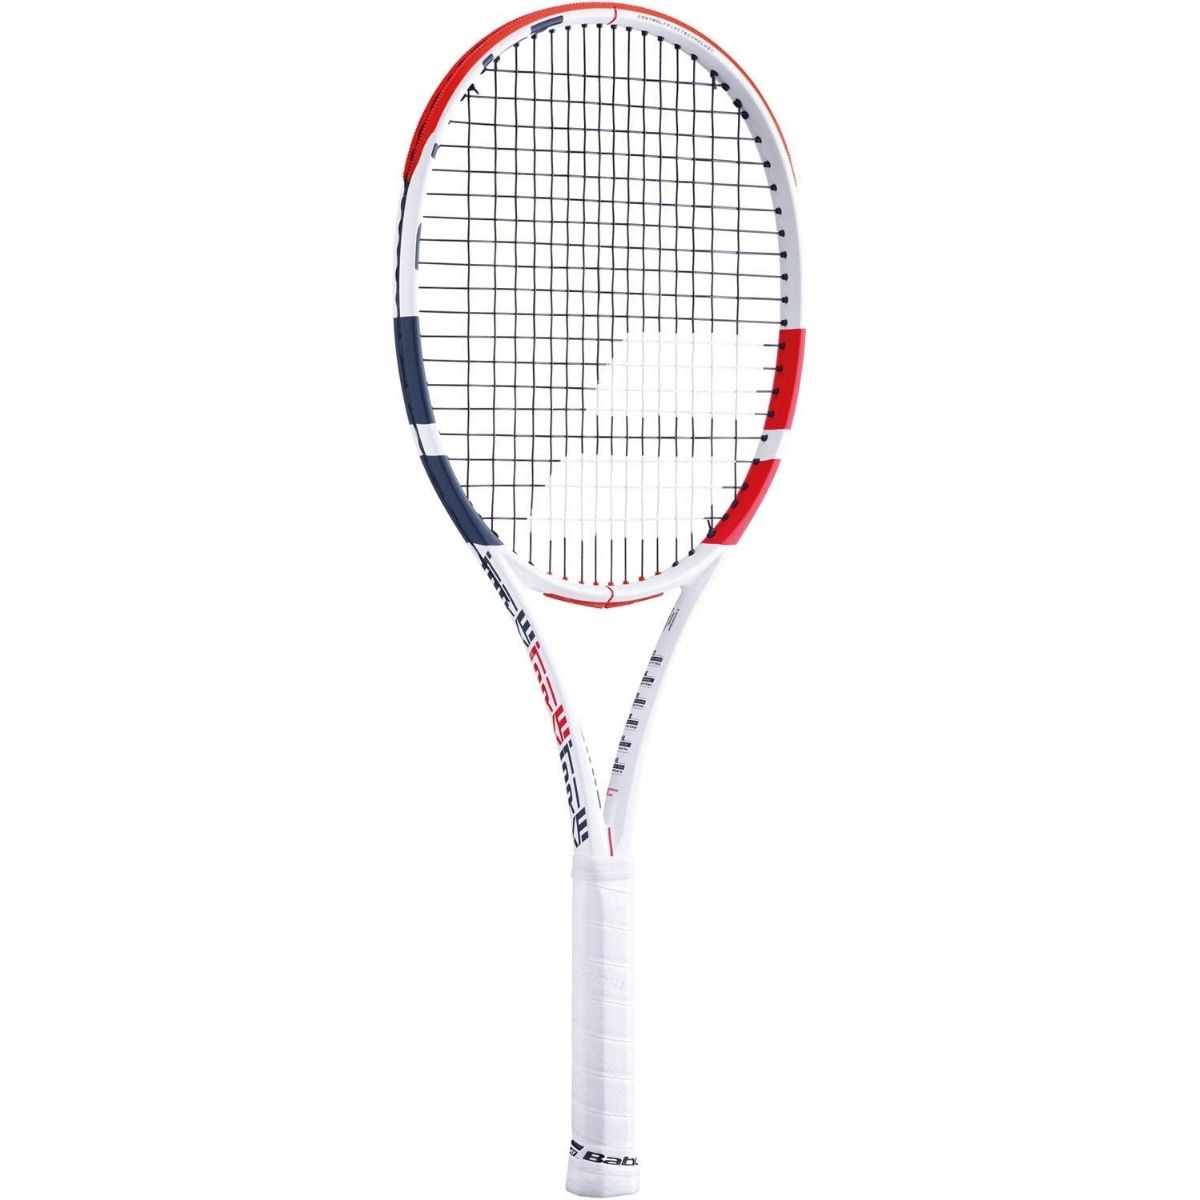 The Best Tennis Rackets Options: Babolat Pure Strike 16x19